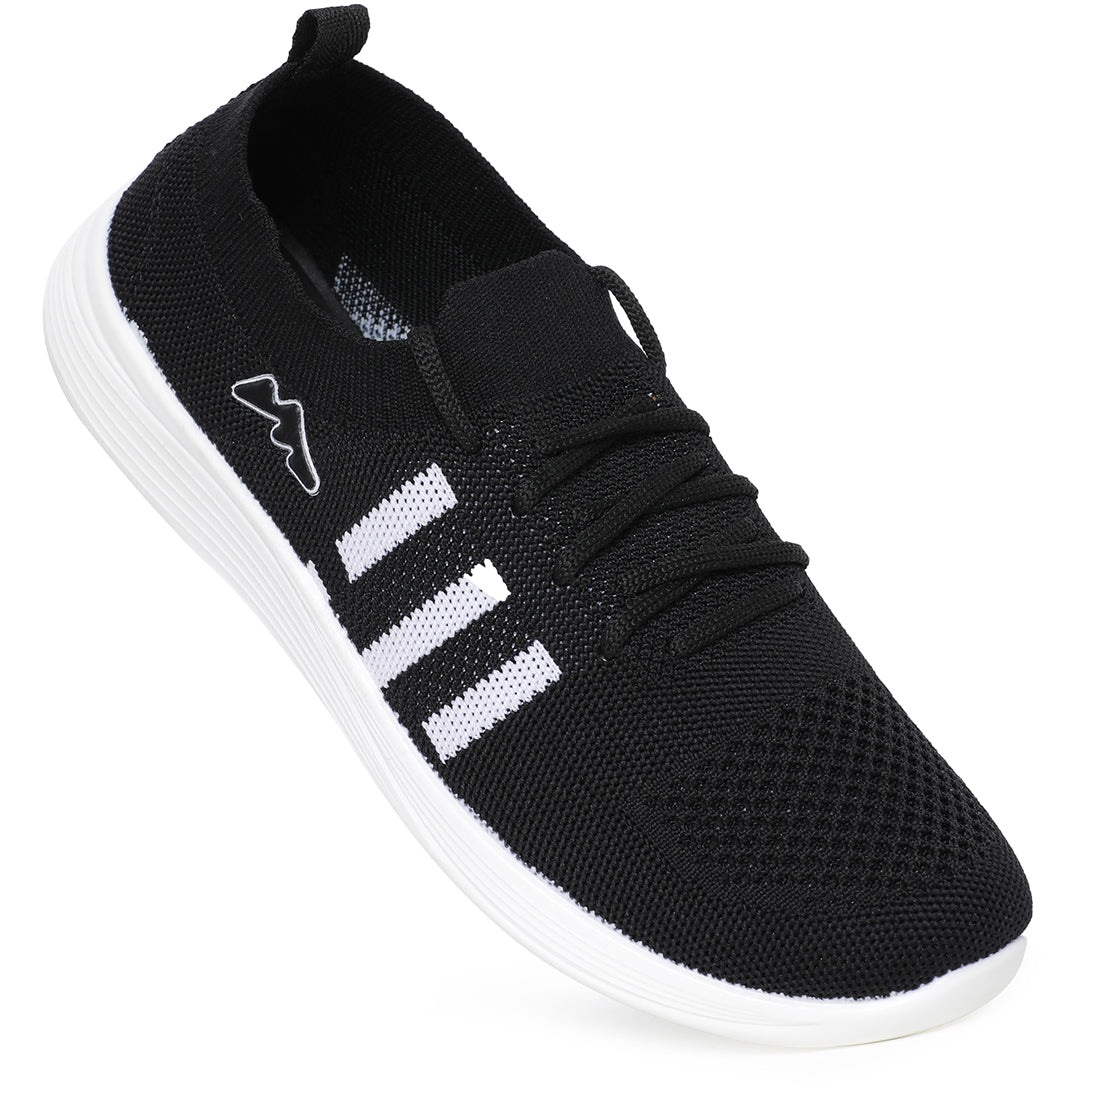 Stimulus PUSTL5022AP Black Stylish Daily Comfortable Casual Sneakers For Women